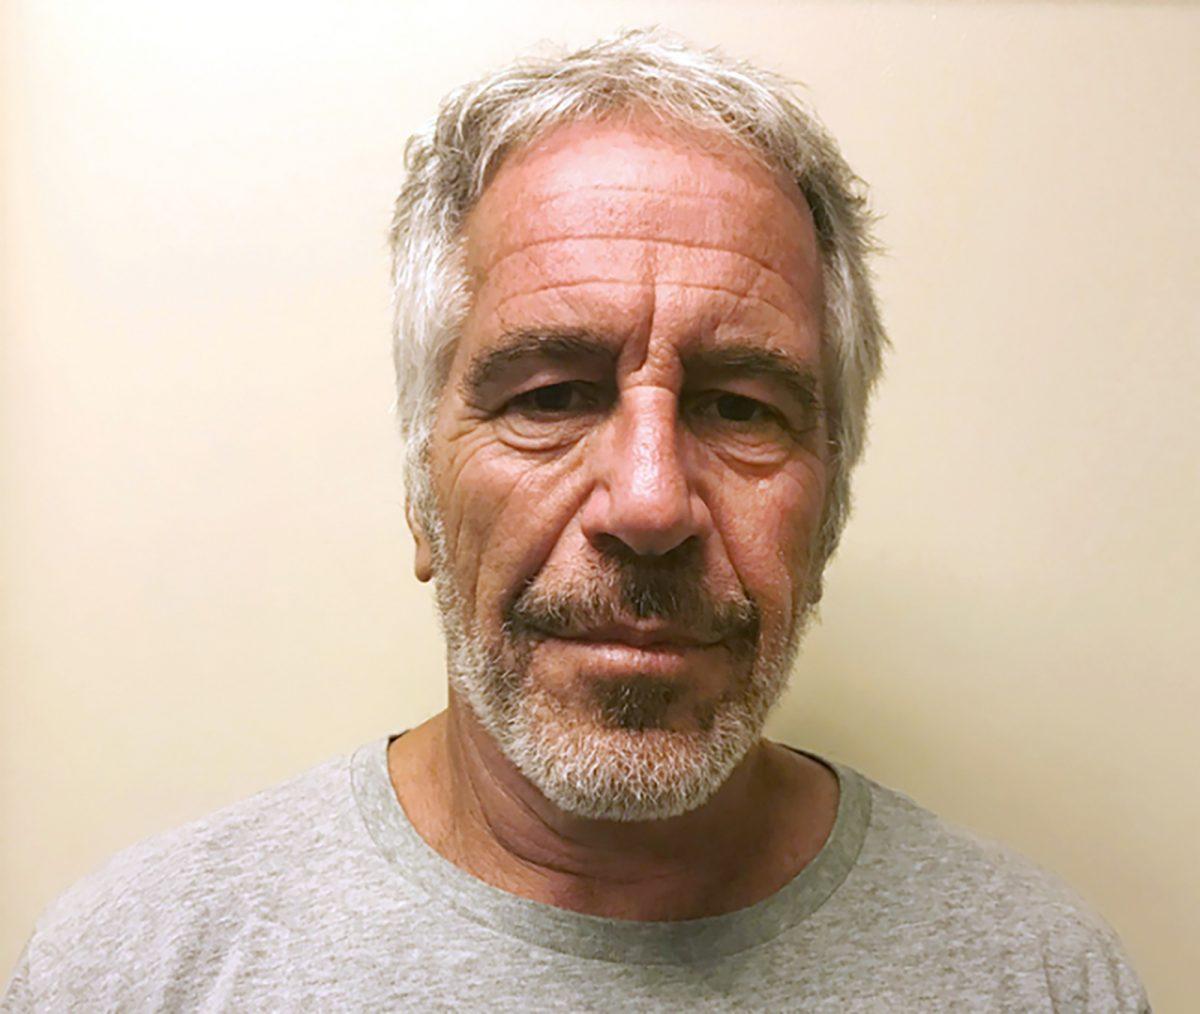 Jeffrey Epstein in a photograph taken for the New York State Division of Criminal Justice Services' sex offender registry March 28, 2017, and obtained by Reuters July 10, 2019. (New York State Division of Criminal Justice Services/Handout via Reuters)